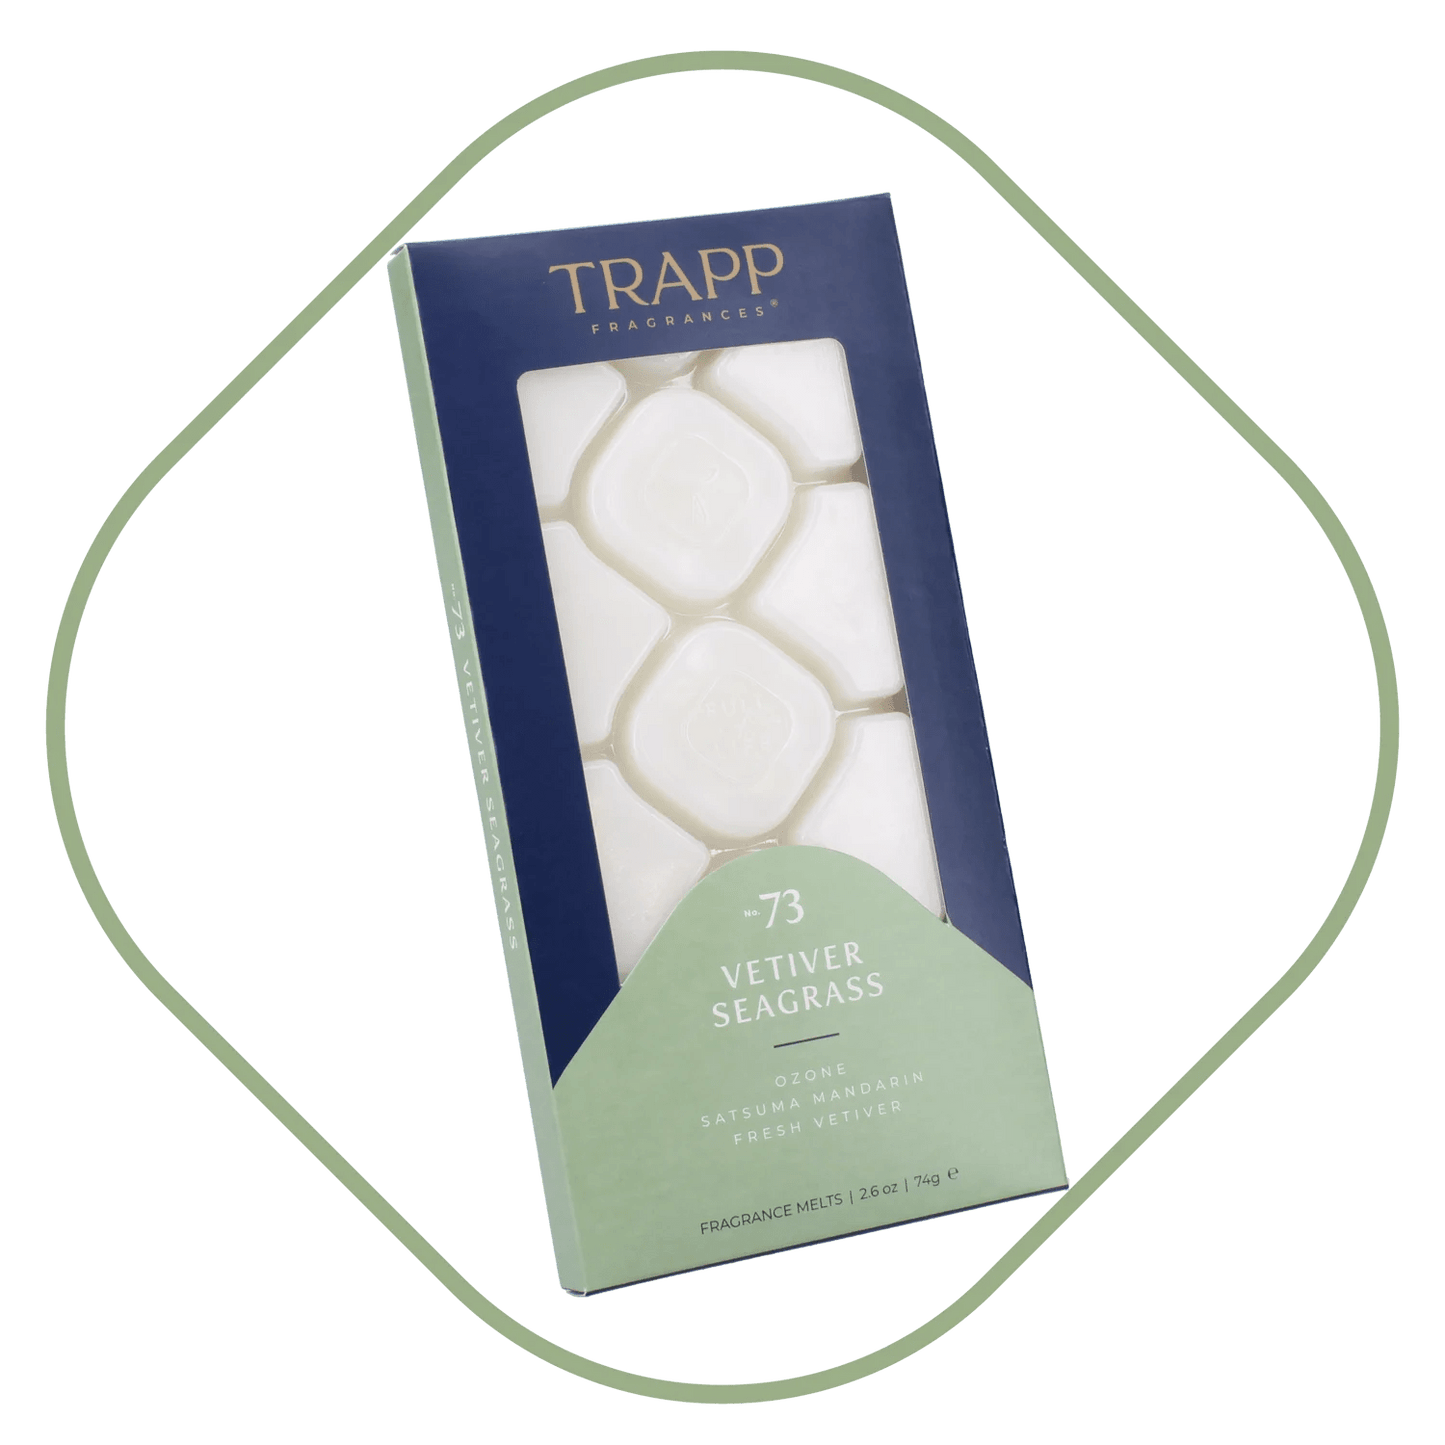 Trapp No.73 Vetiver Seagrass Fragrance Melts